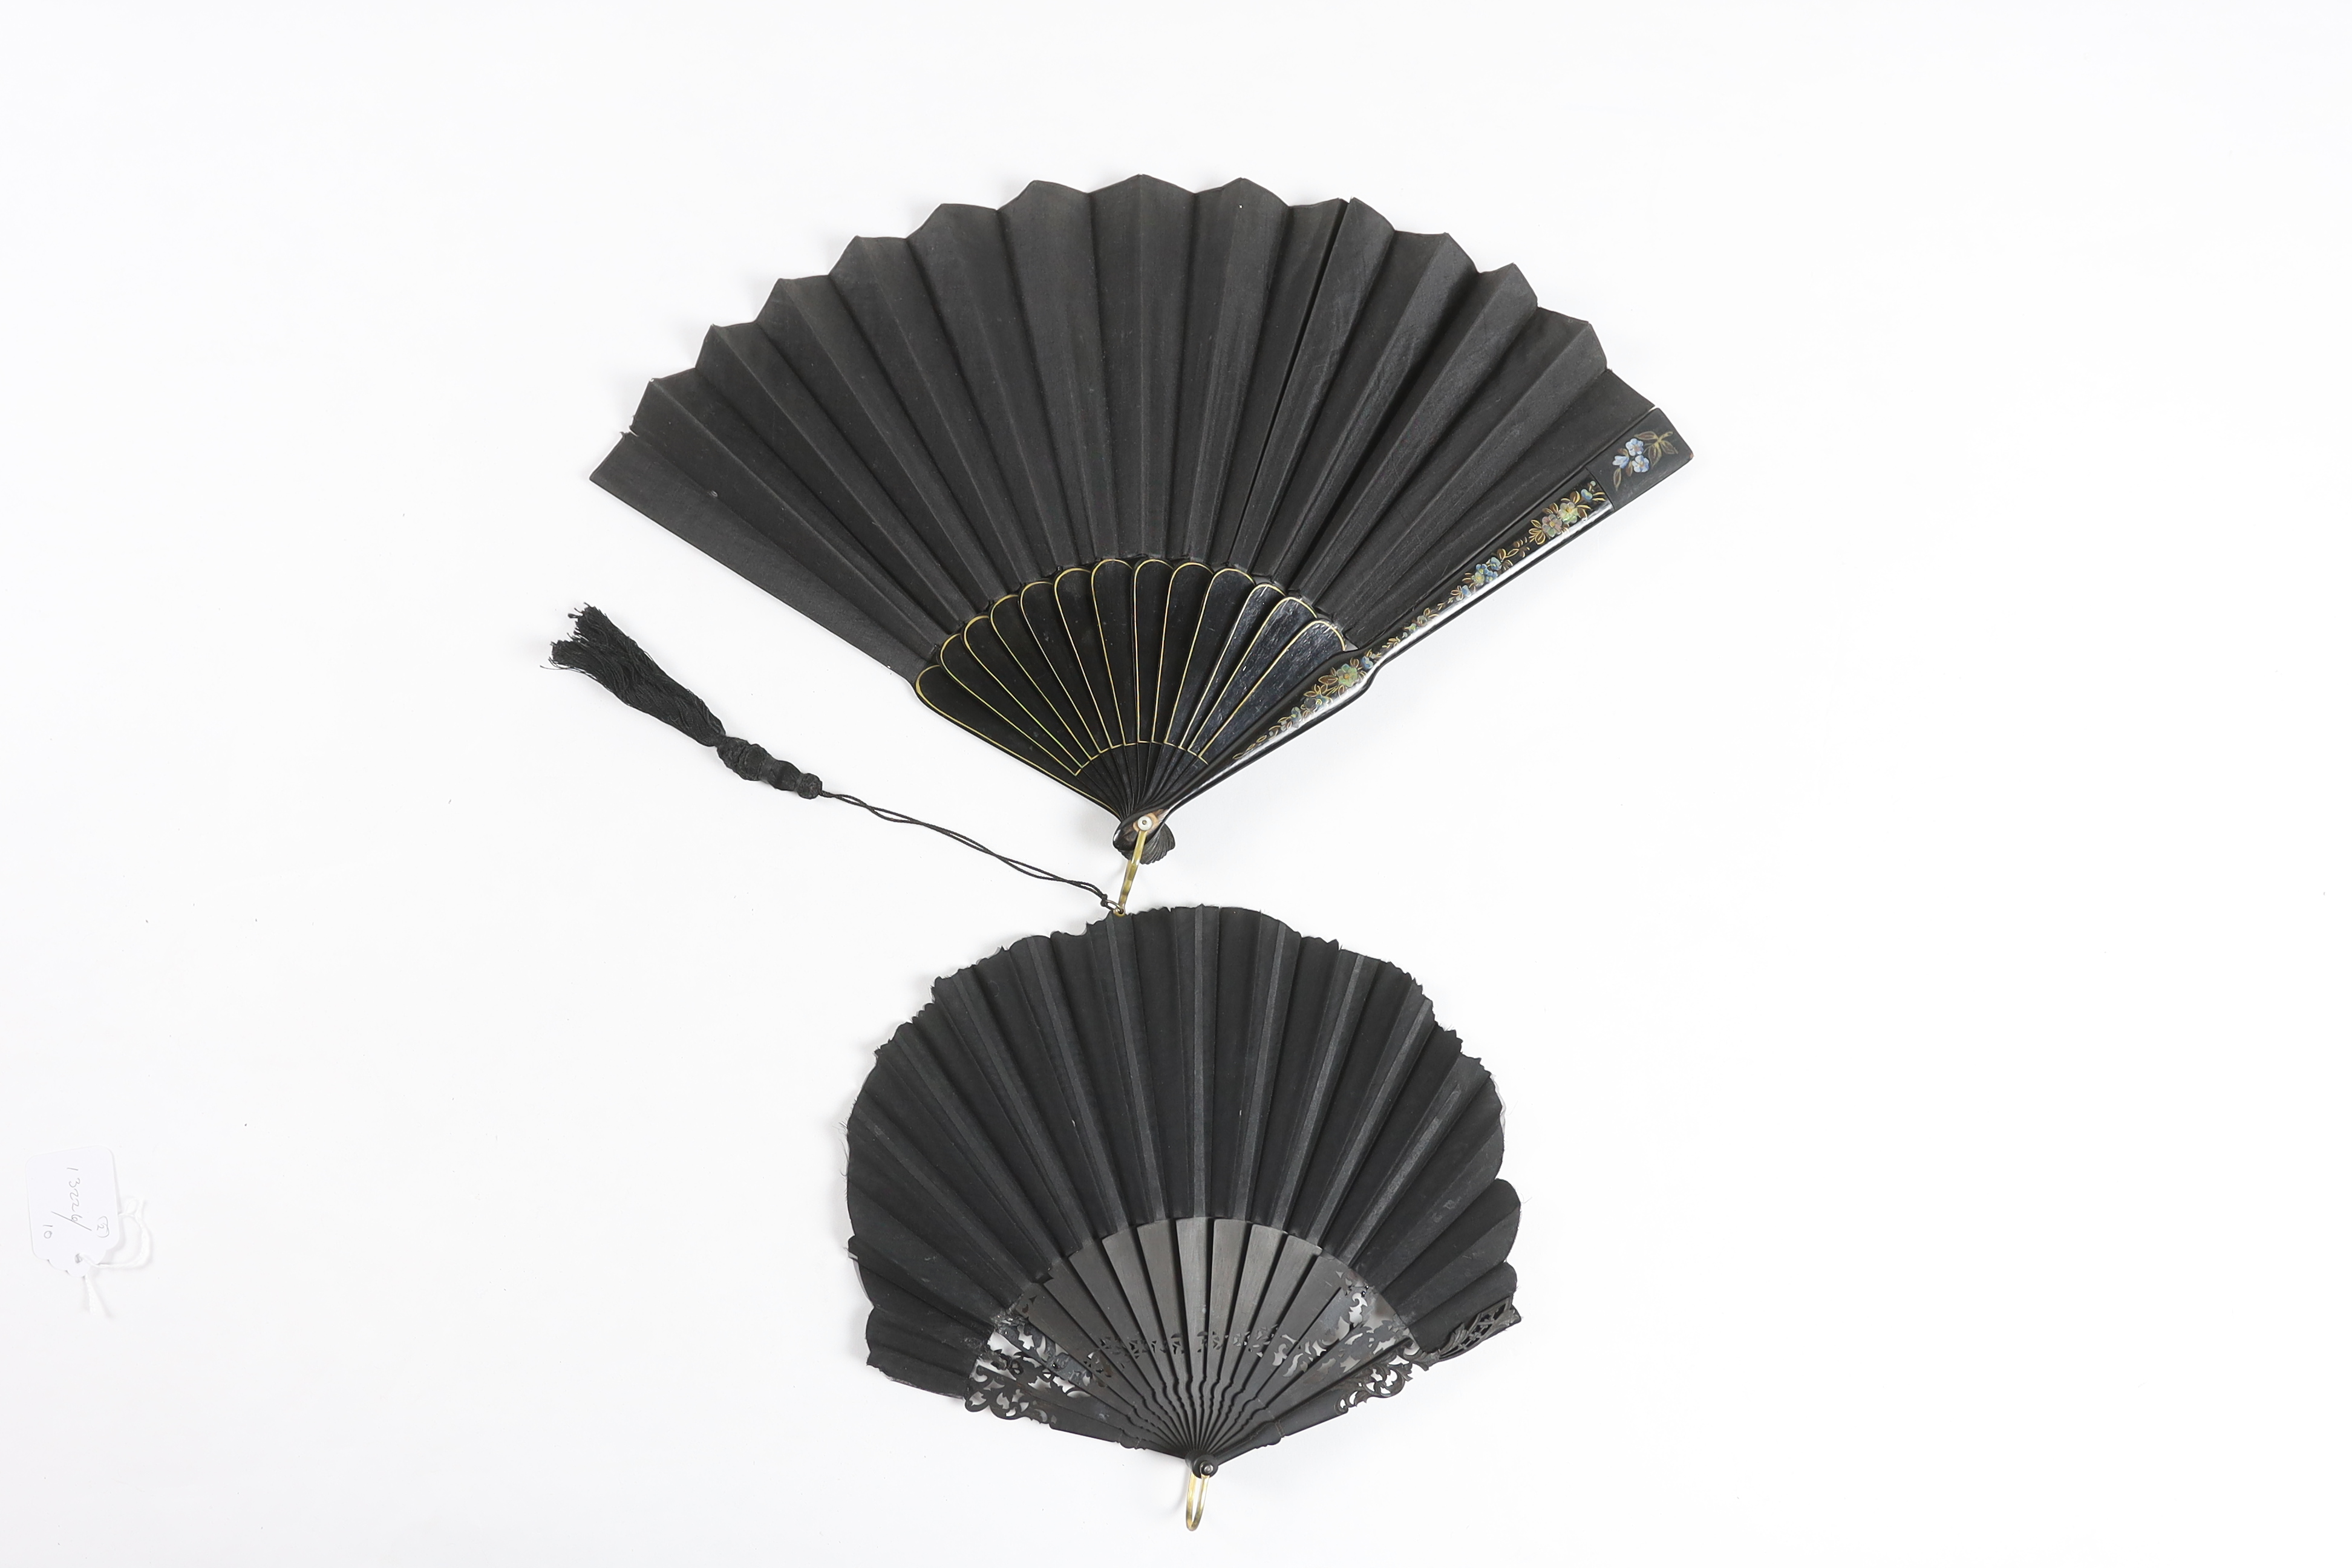 A late 19th century hand painted shaped and carved figurative fan, signed, together with a lacquer and mother of pearl fan, with matching leaf and guard decoration